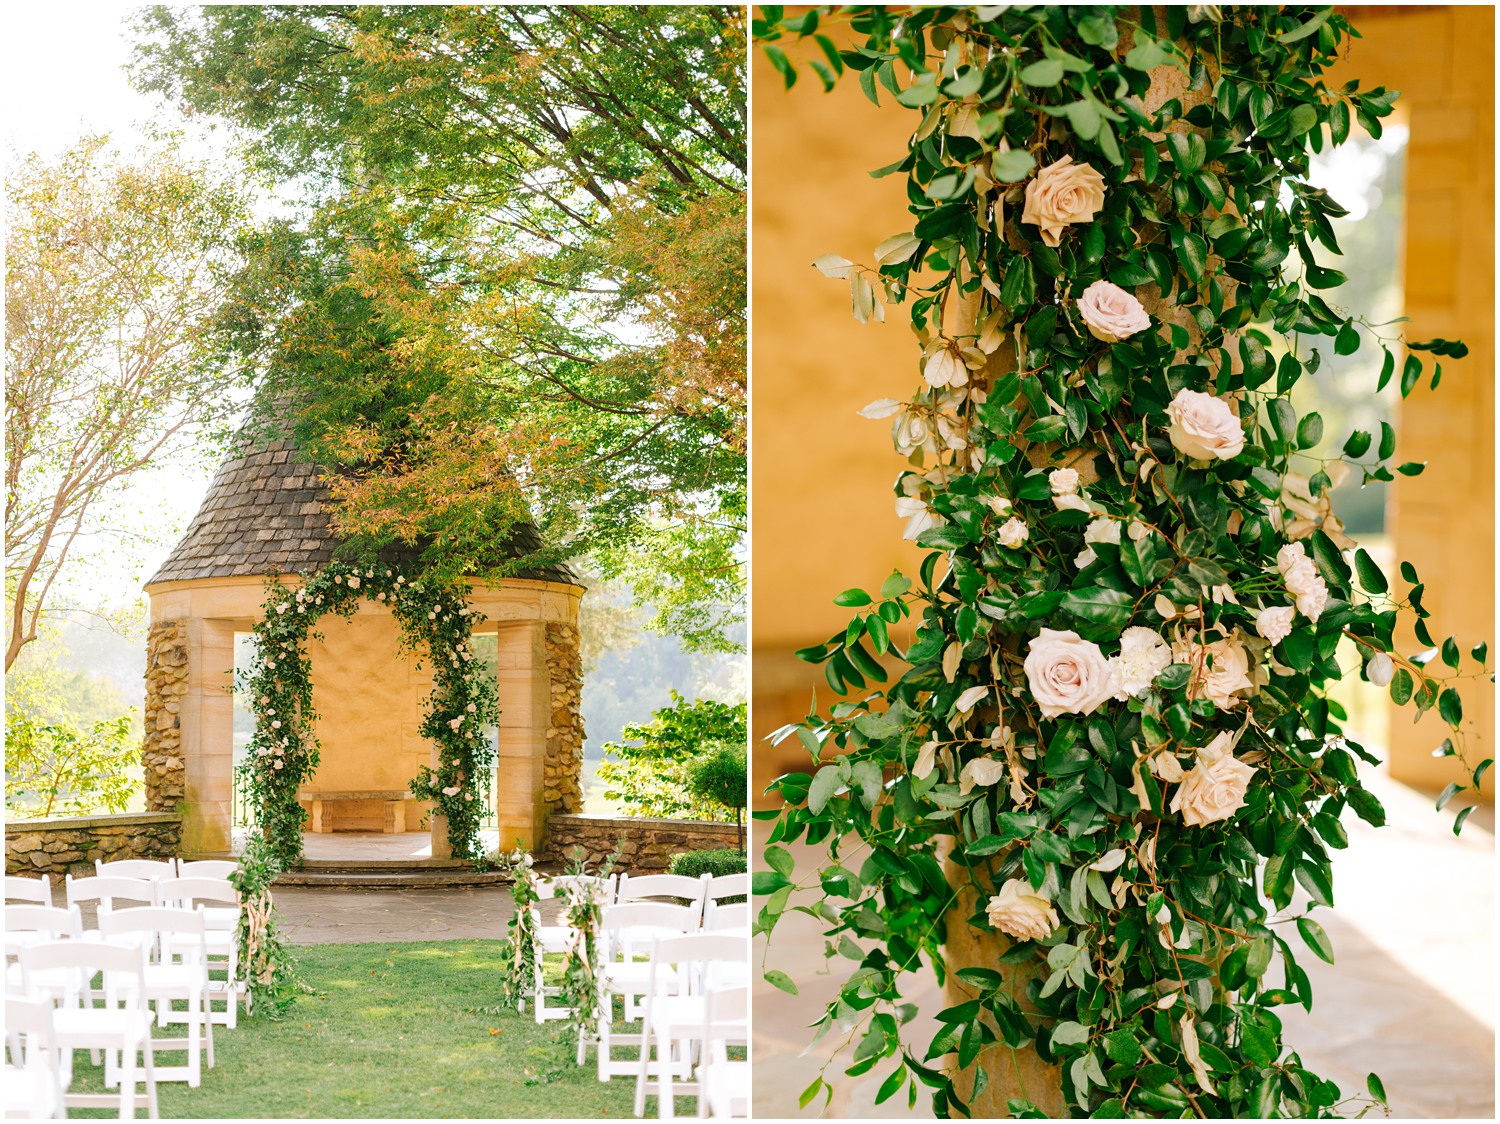 pink rose on greenery for floral arbor at fall wedding